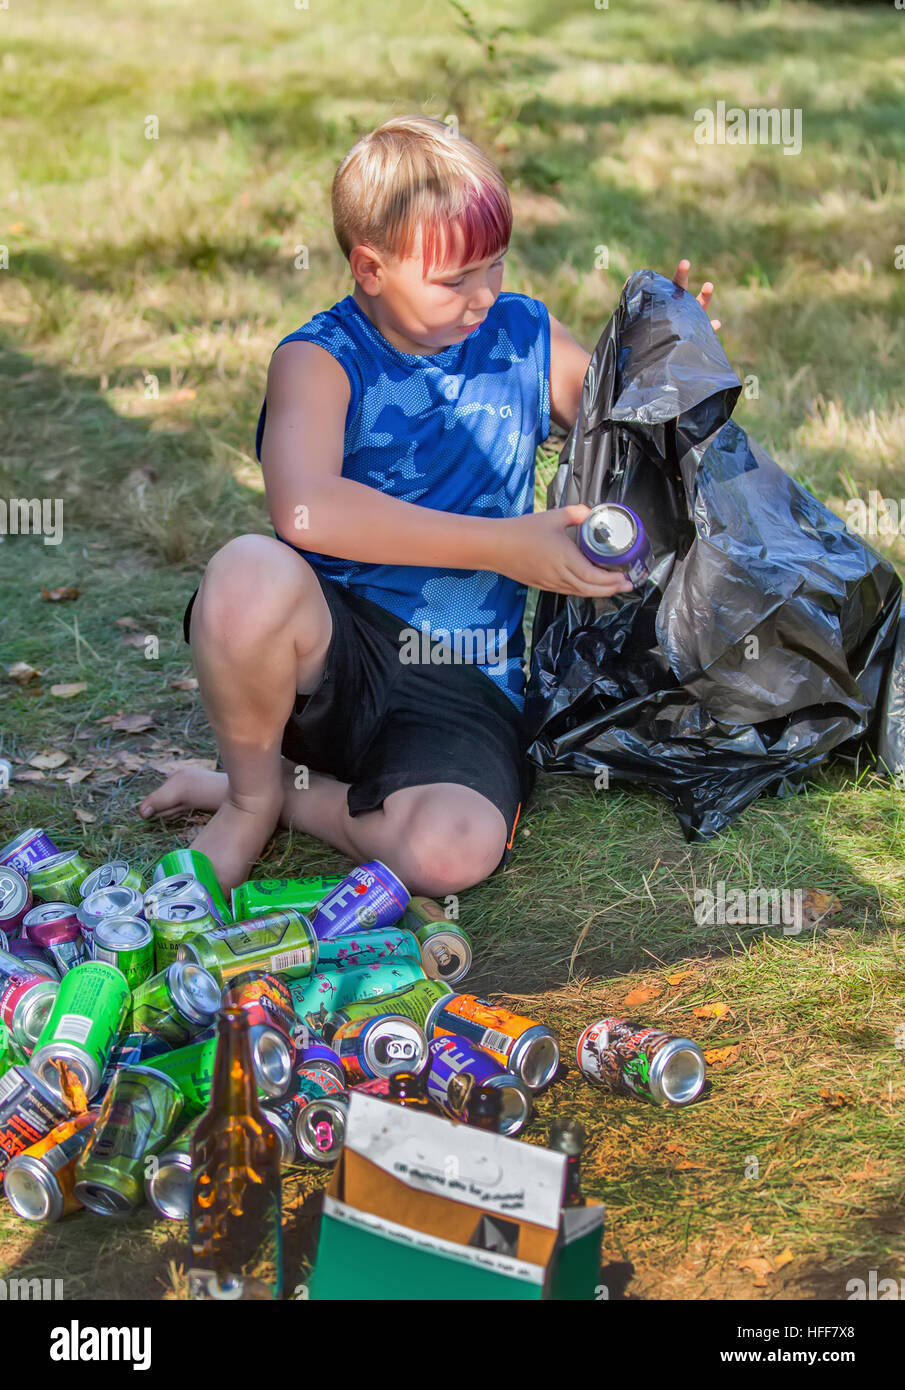 A boy about ten-years old collects cans and bottles into a black sack for recycling in Vermont, USA. Stock Photo